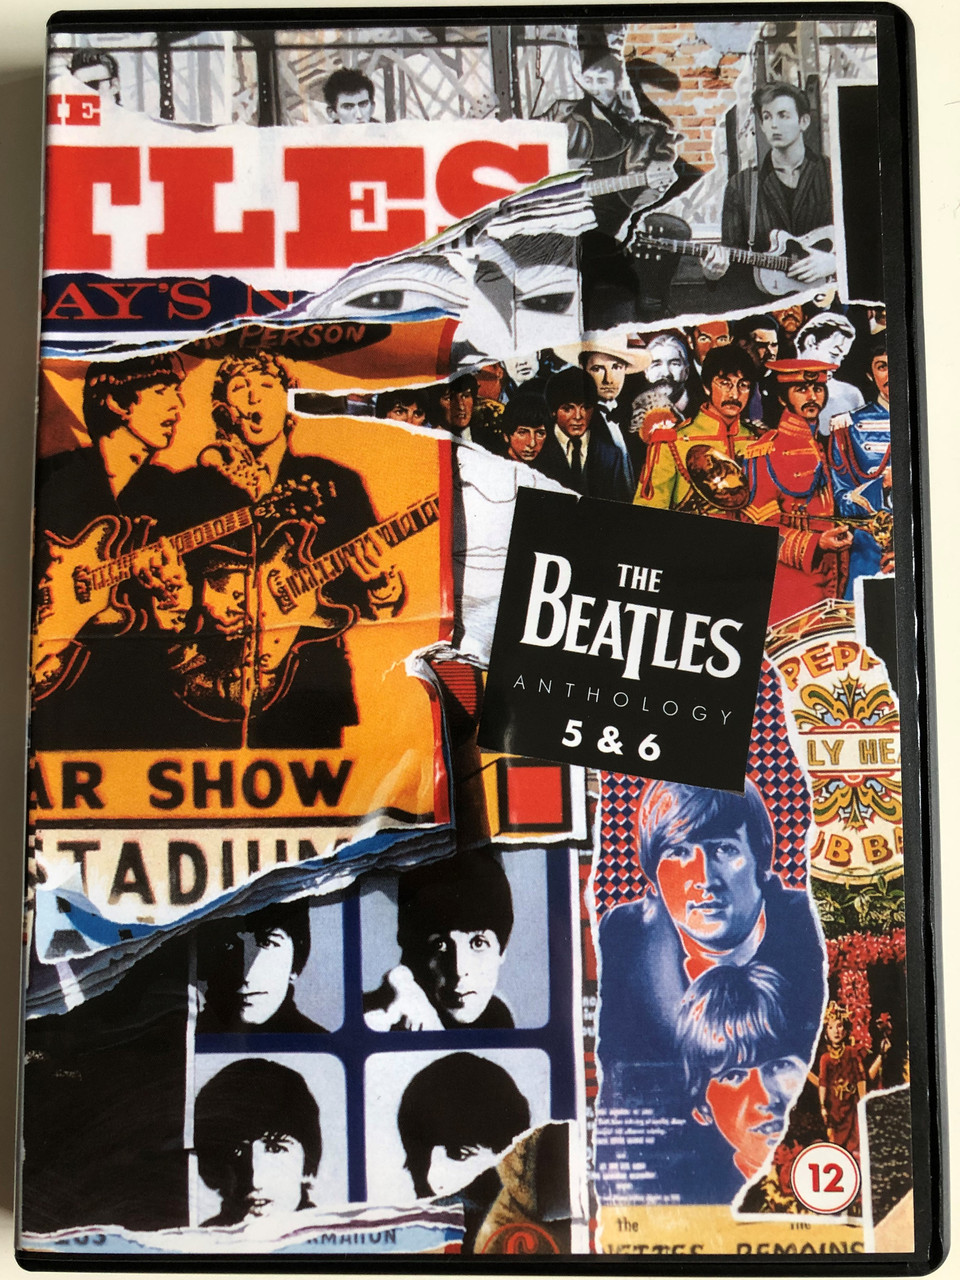 The Beatles Anthology 5 & 6 DVD 2003 / Episodes 5, 6 / Directed by Geoff  Wonfor / Apple Records / 2 Episodes - bibleinmylanguage